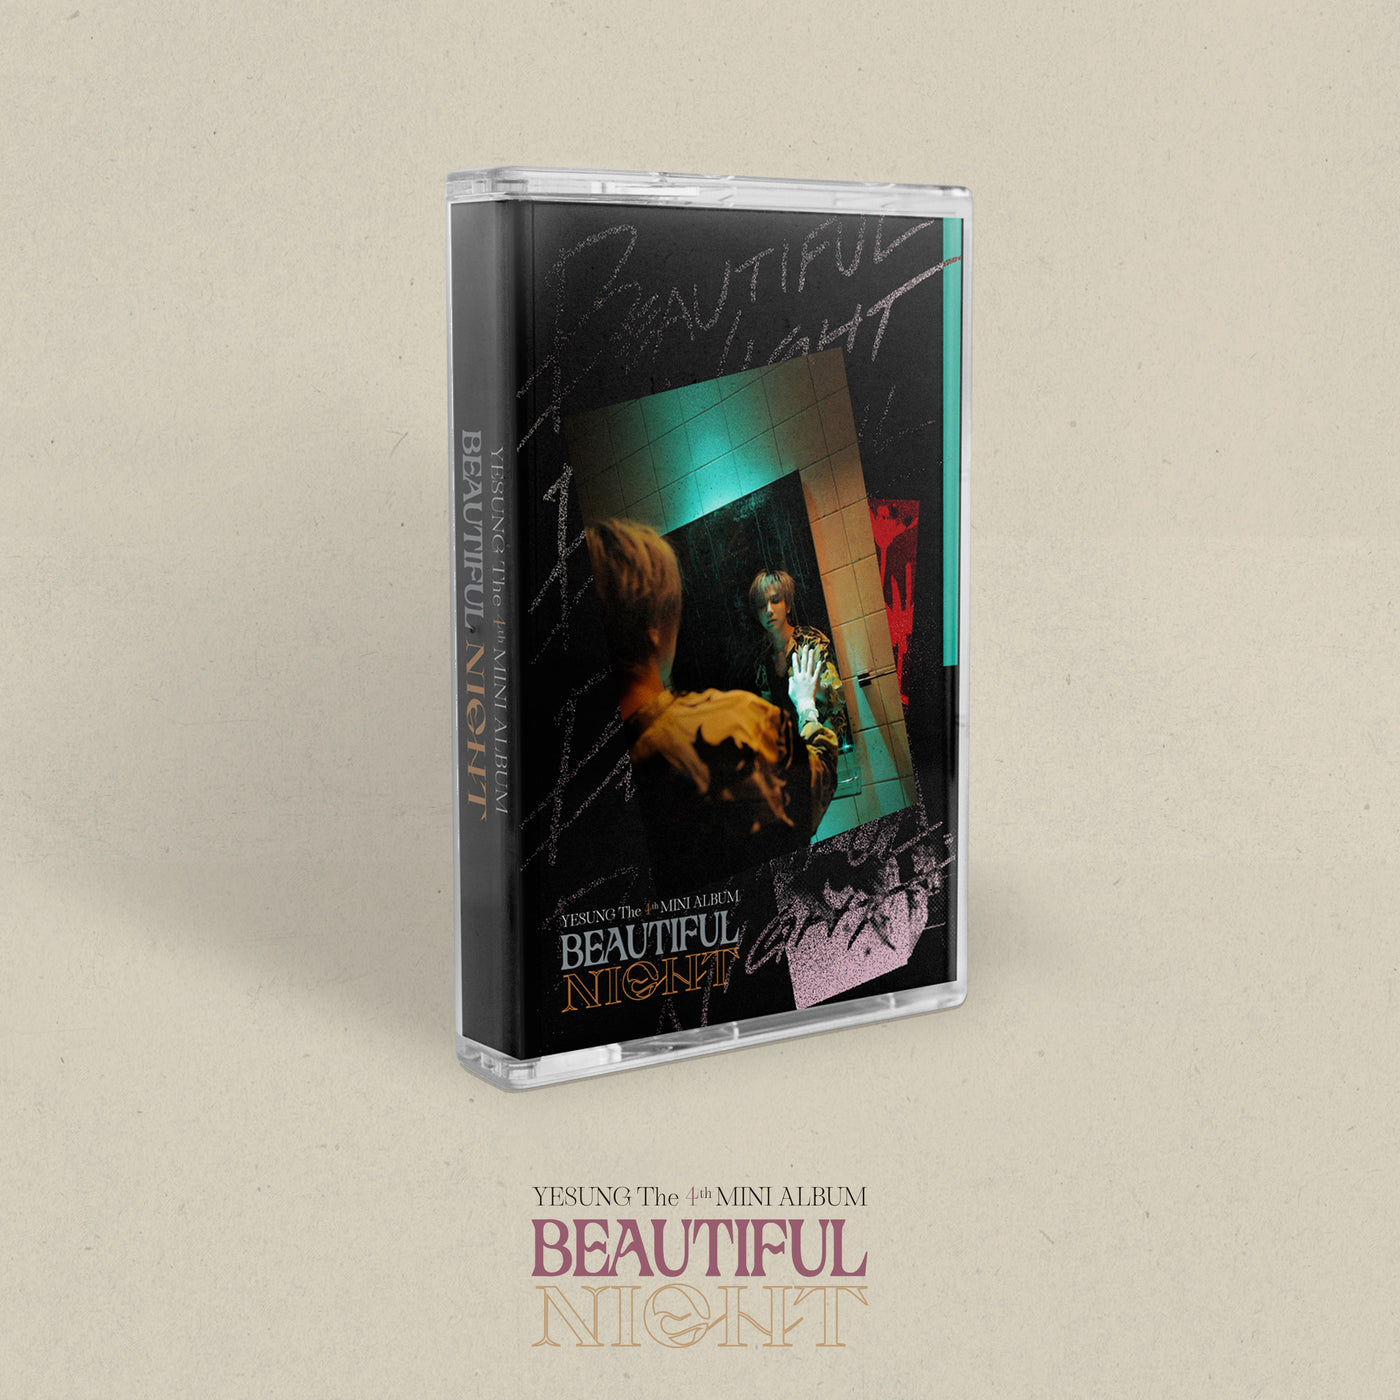 YESUNG 4th Mini Album - [Beautiful Night] (Cassette Tape Ver.) (First Press Limited Edition) 🇰🇷